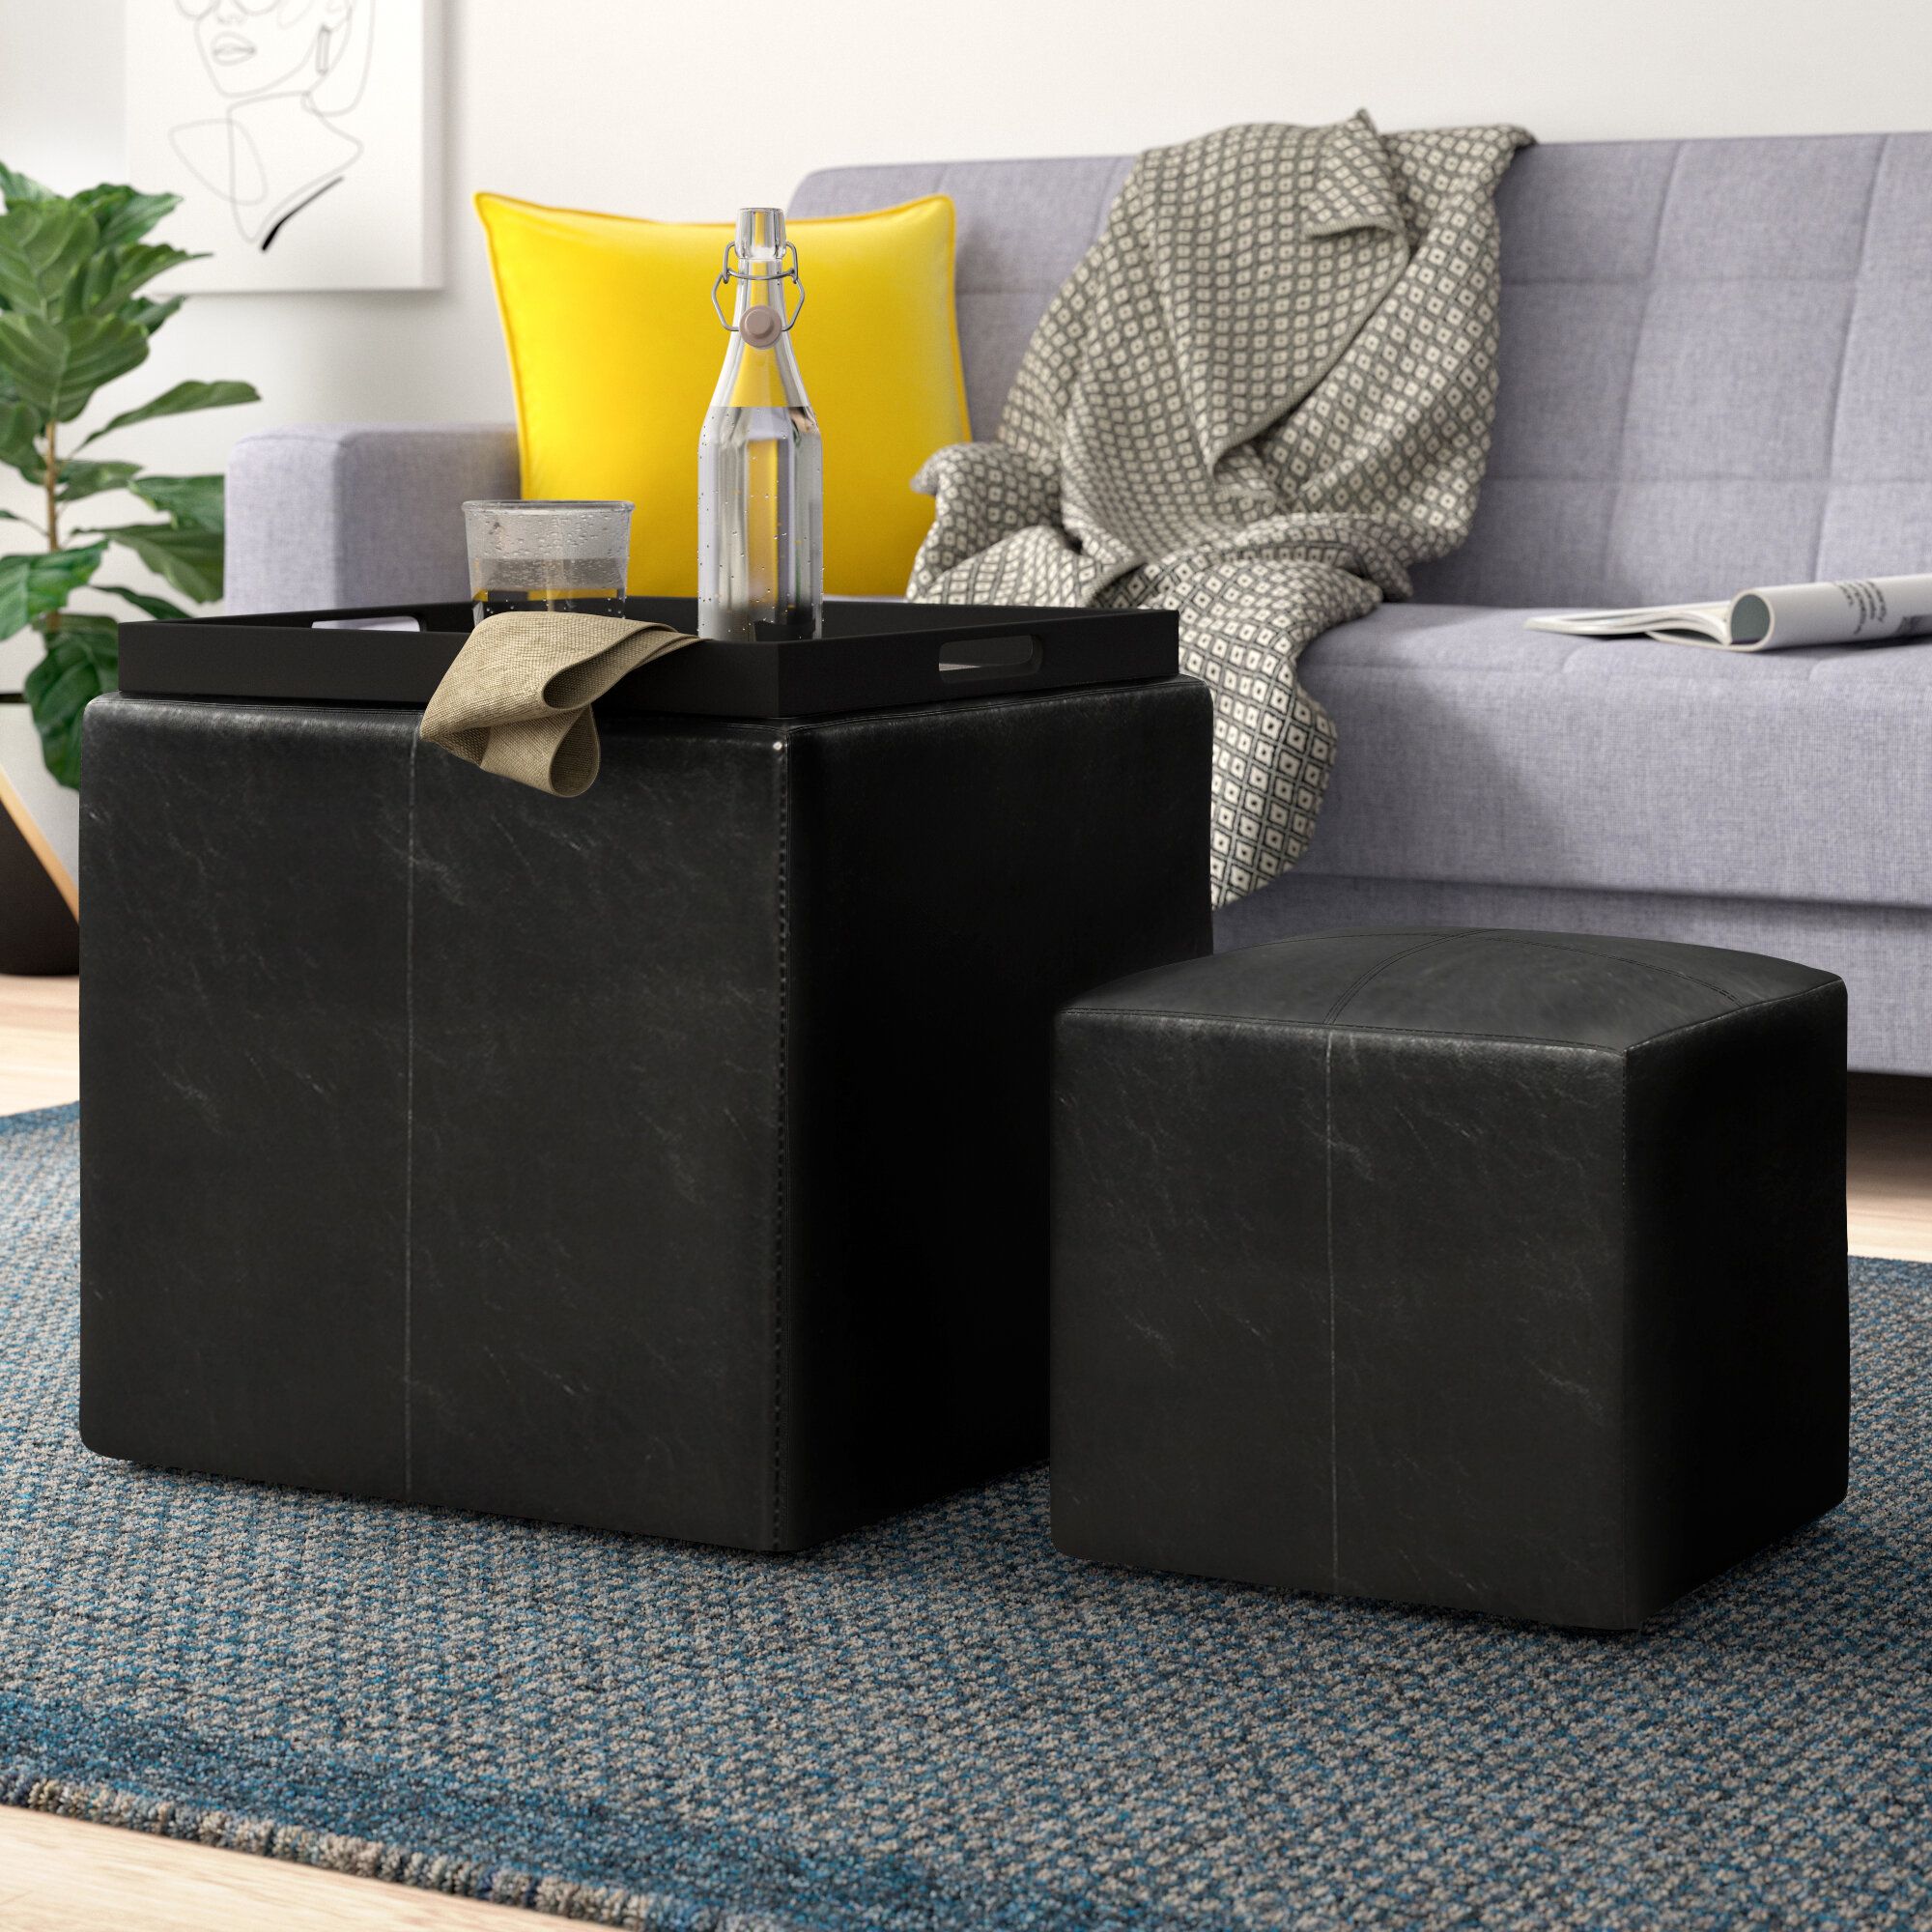 Zipcode Design™ Marla Square Ottoman With Stool And Reversible Tray &  Reviews | Wayfair Throughout Ottomans With Reversible Tray (View 4 of 15)